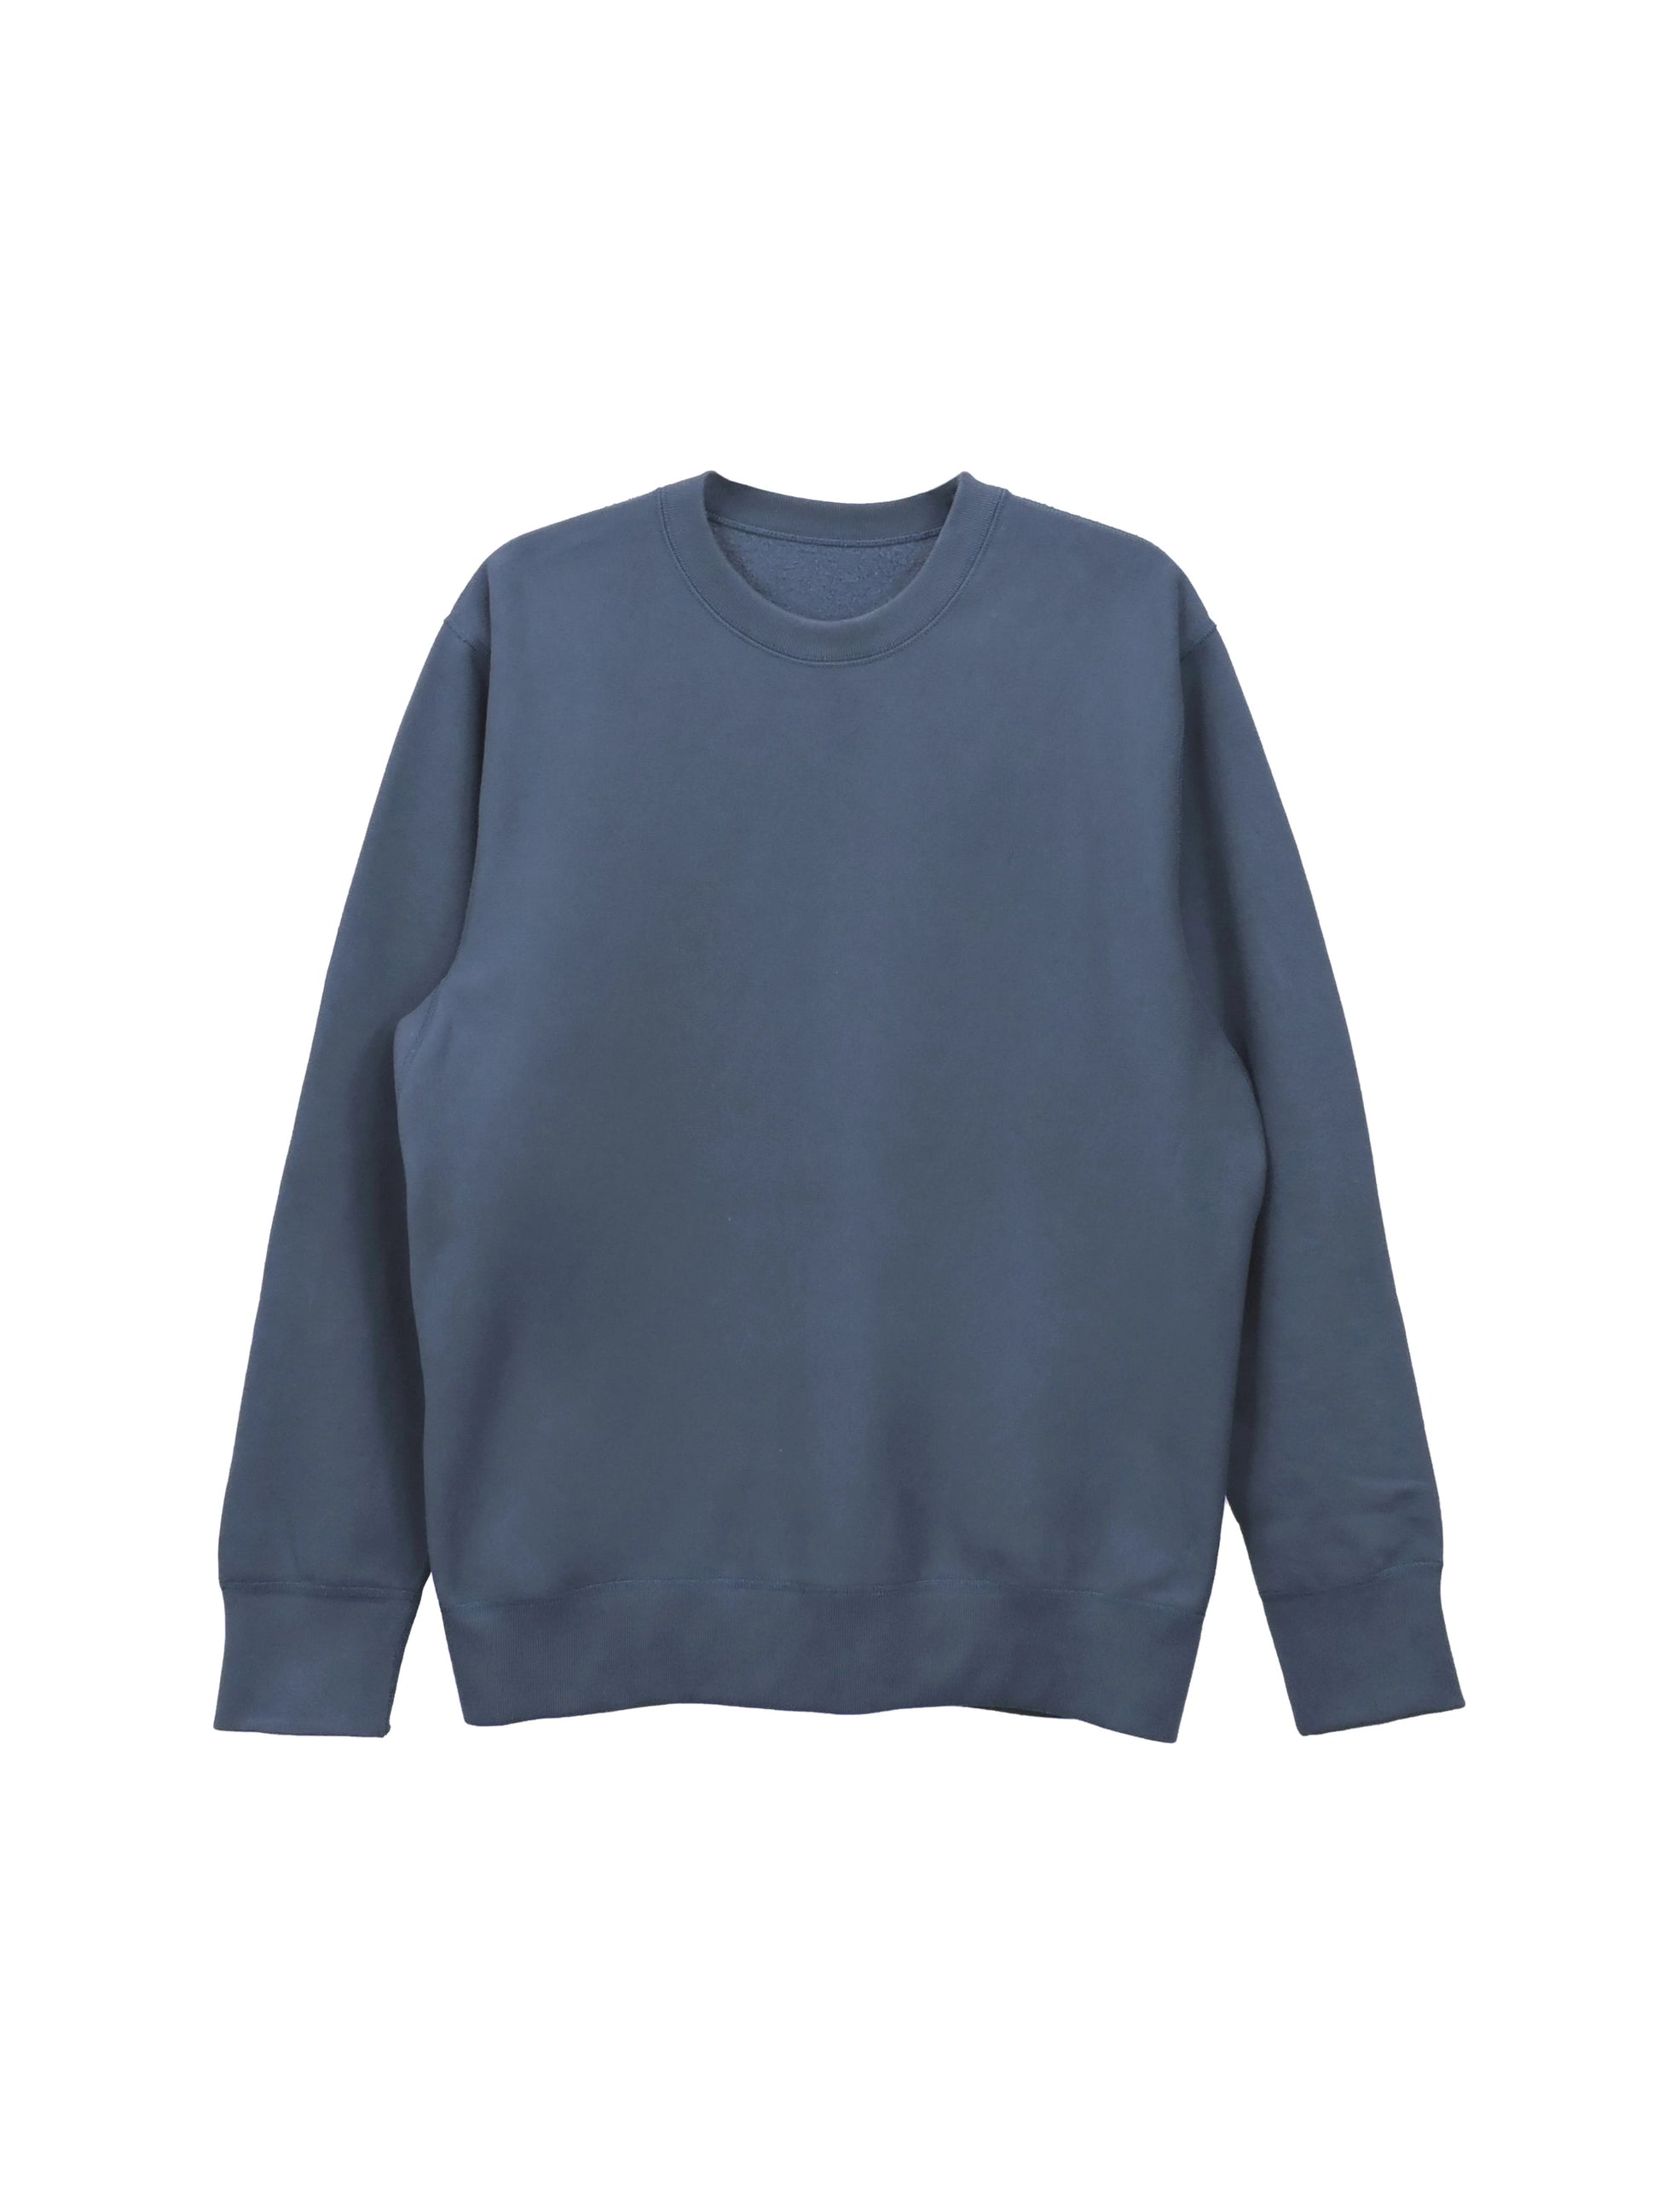 Sailor Blue Fleece Crewneck with Fitted Ankle Cuffs